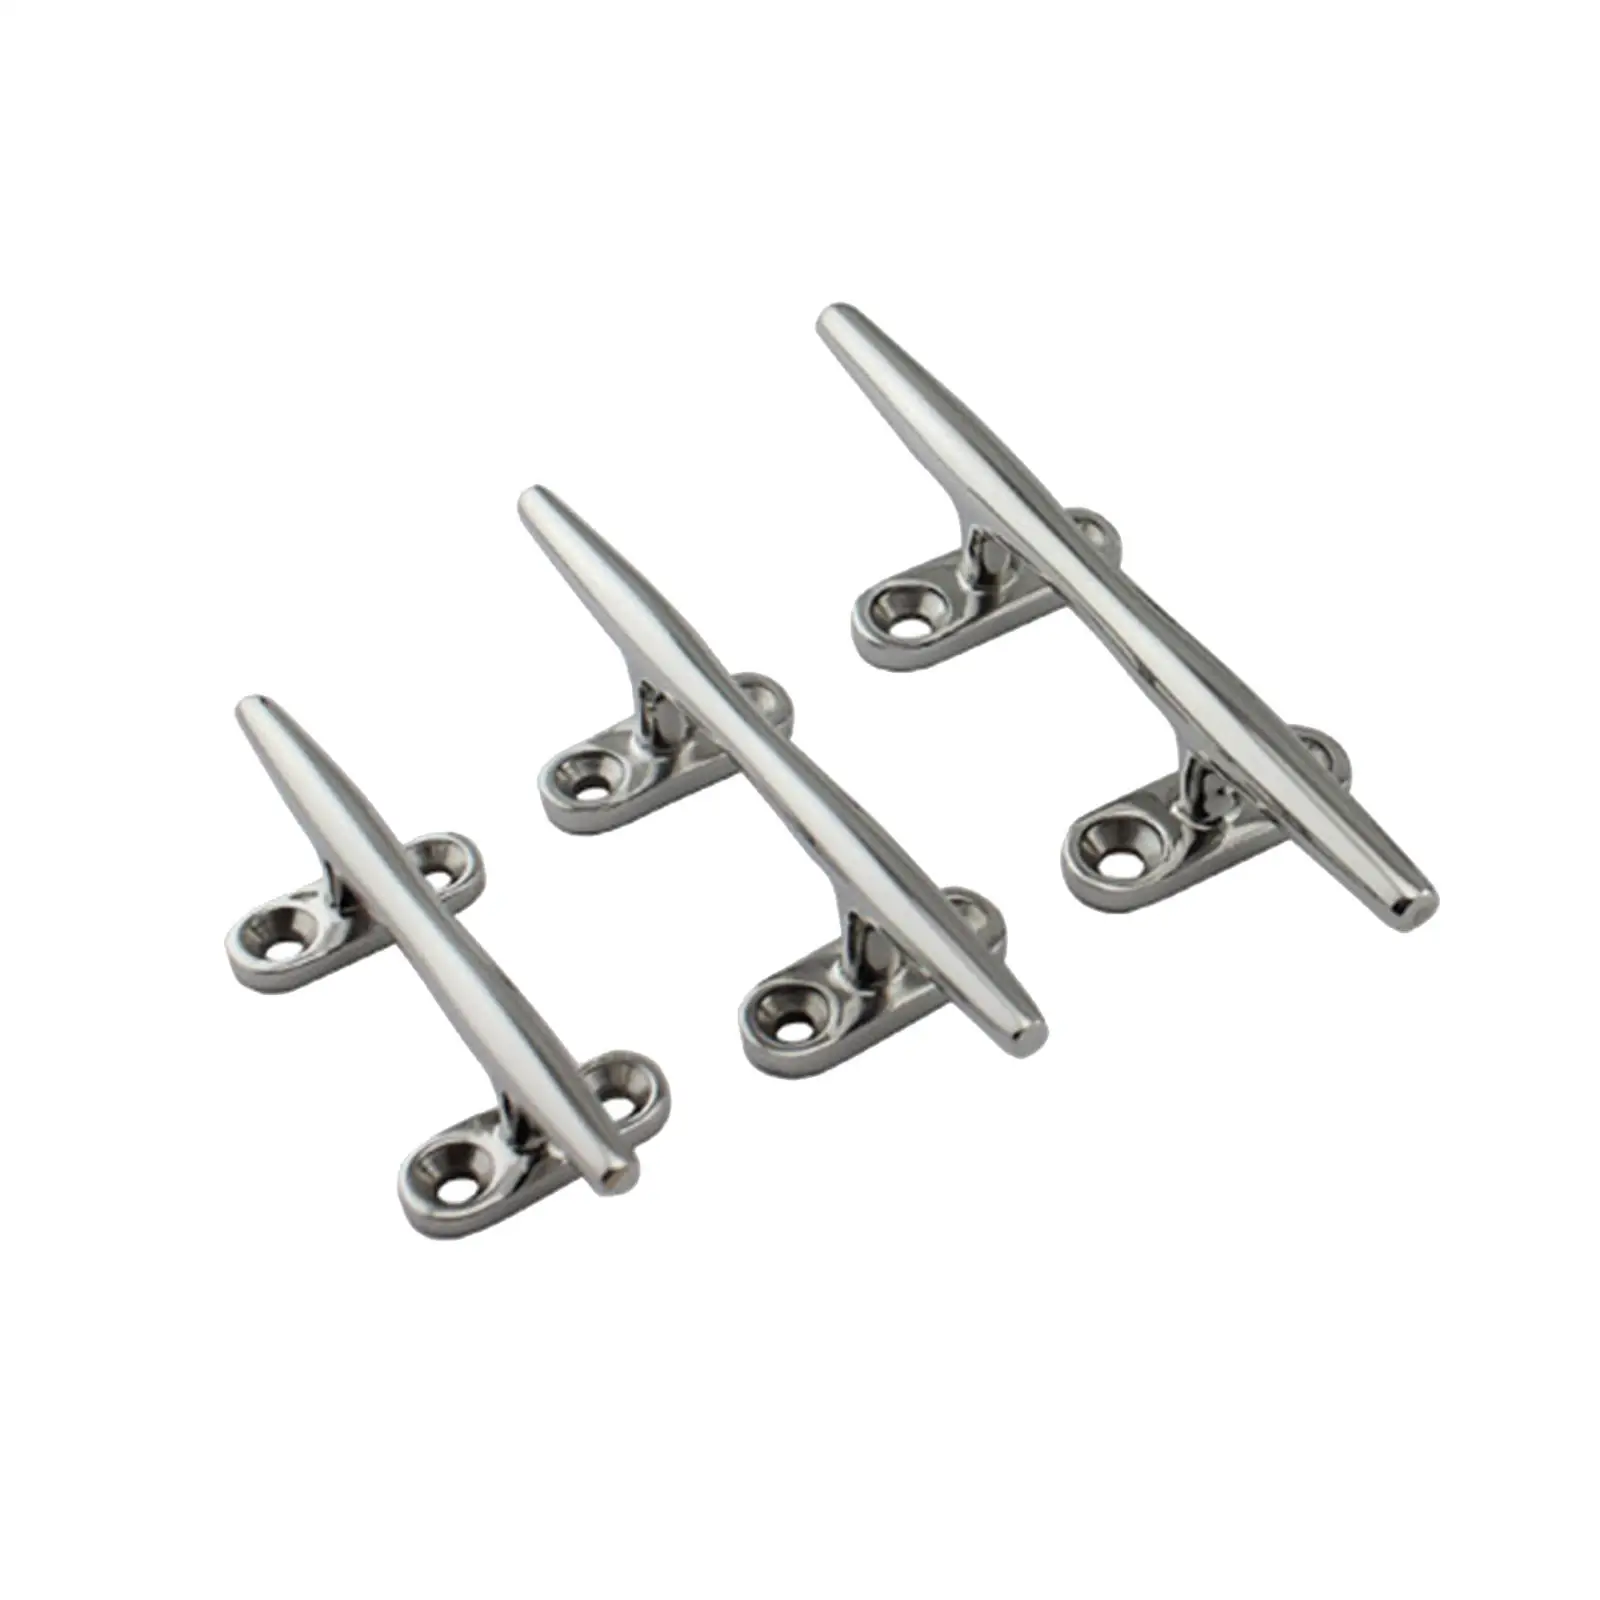 

Boat Cleat Sturdy with 4 Screws 316 Stainless Steel Mooring Accessories Open Base Deck Cleat for Watercraft Kayaks Yacht